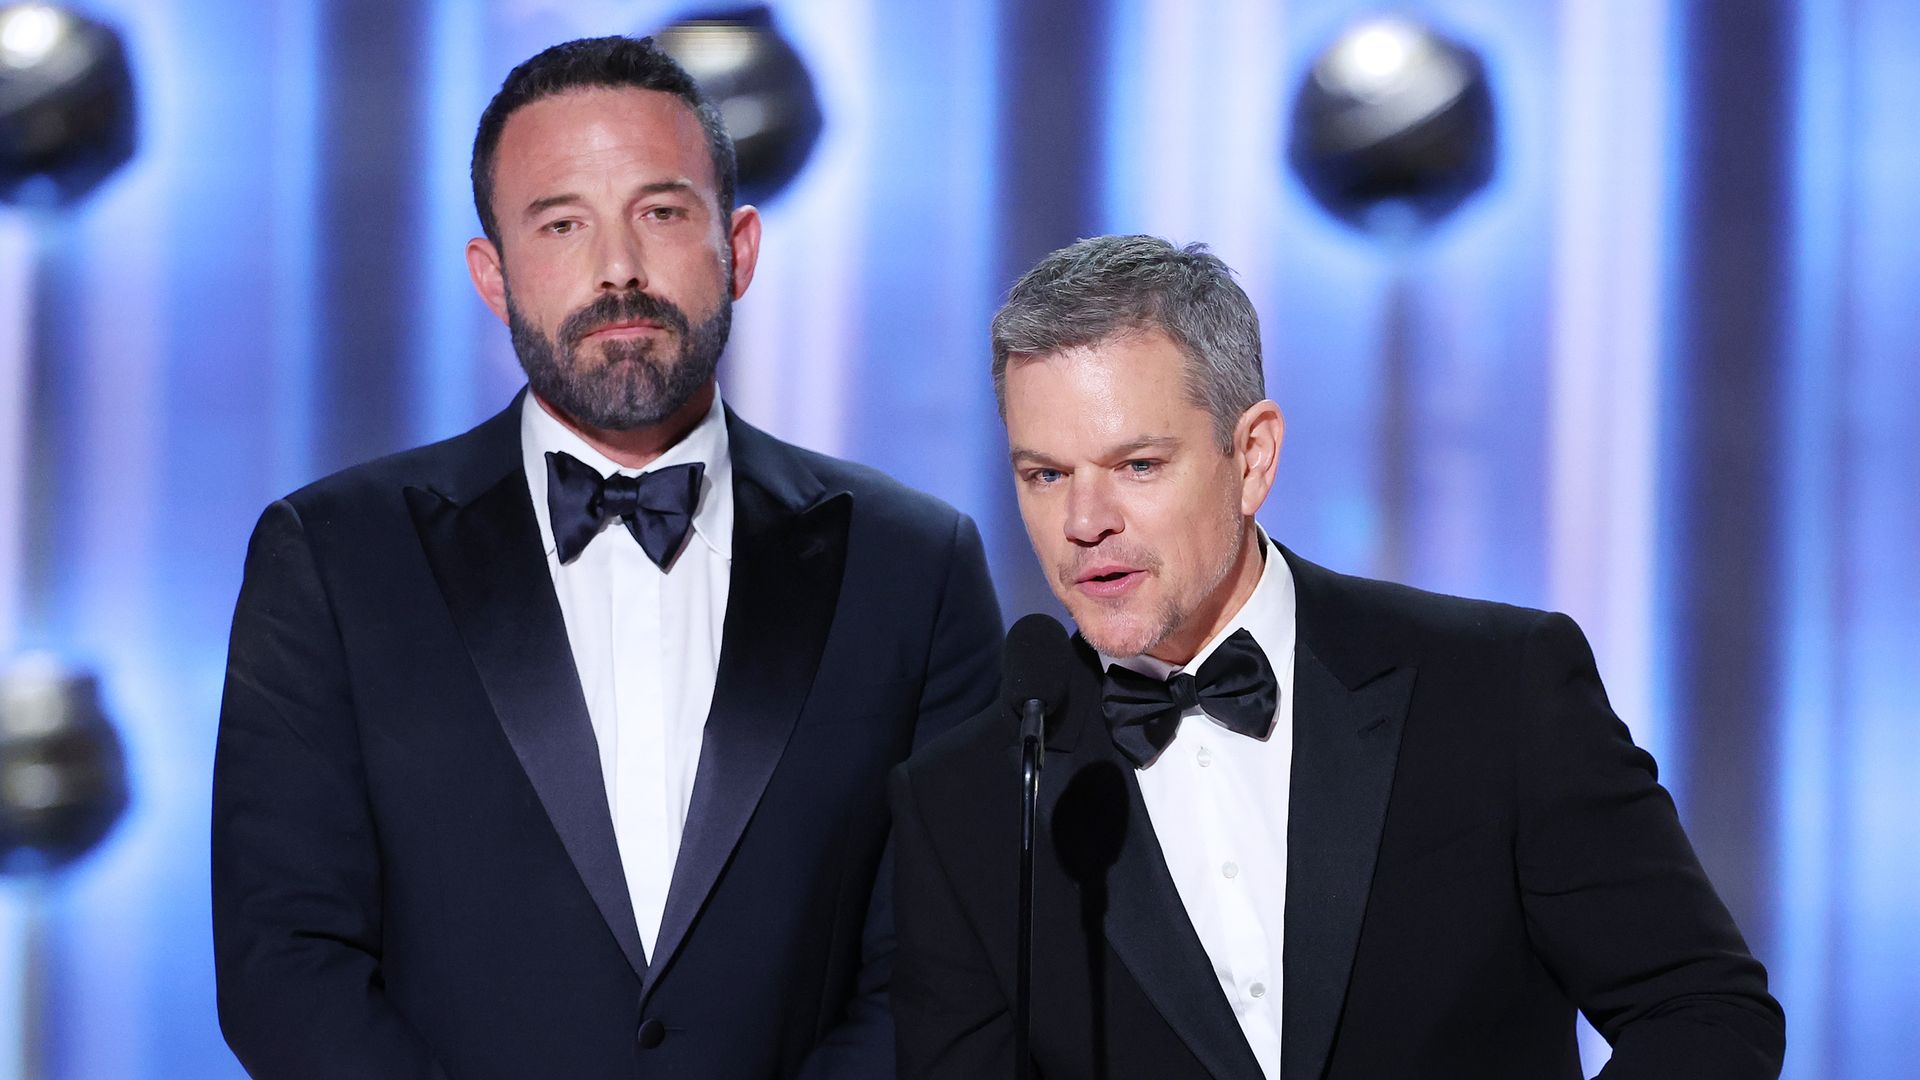 Ben Affleck and Matt Damon at the 81st Golden Globe Awards held at the Beverly Hilton Hotel on January 7, 2024 in Beverly Hills, California.